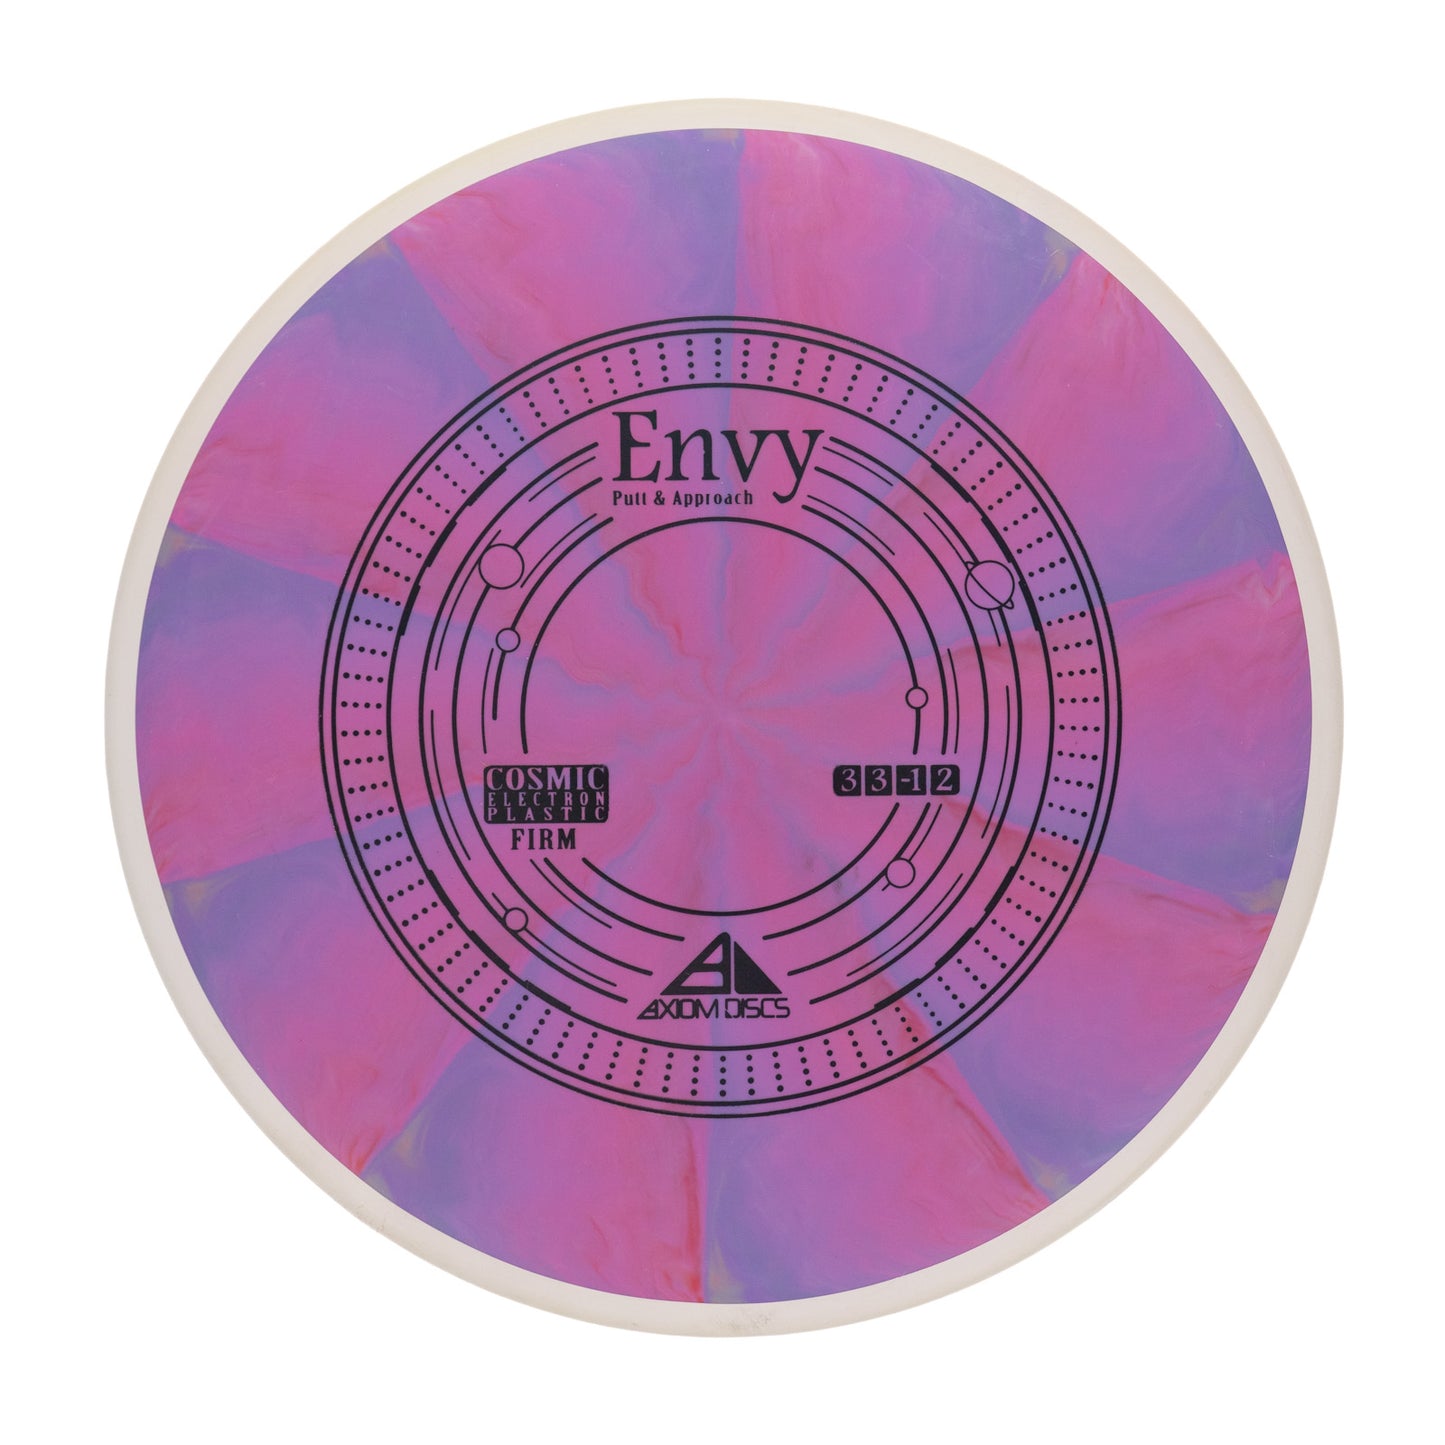 Axiom Envy - Cosmic Electron Firm 171g | Style 0006